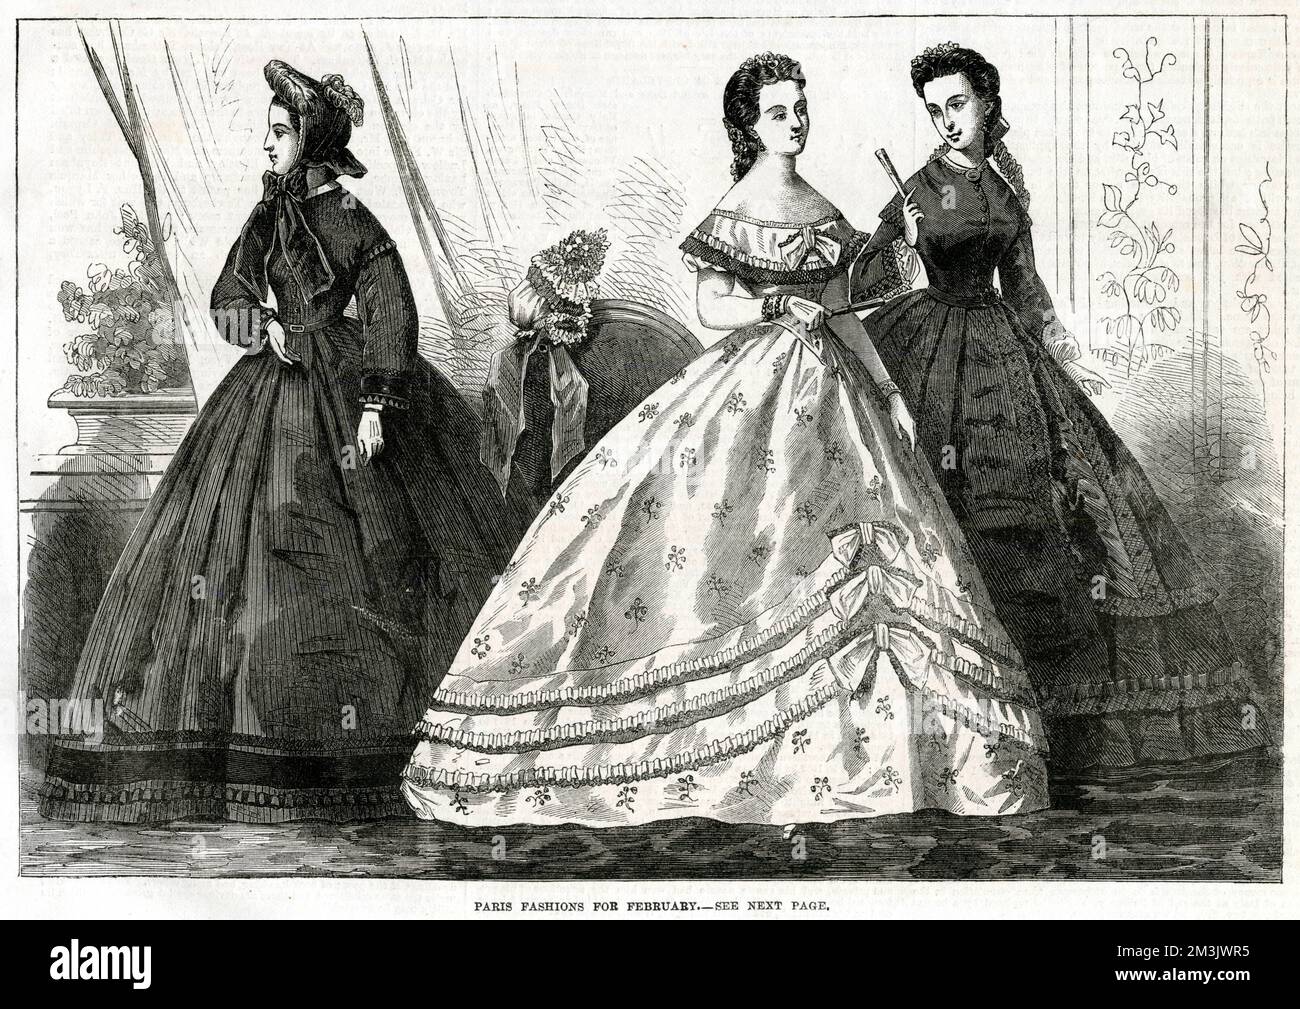 Sketches of designs featured on the monthly ladies fashion page.  (From left) The walking dress, made from dark brown silk, trimmed with black velvet. The bonnet is also made from black velvet adorned with a violet feather.   The ball dress is white with black brocaded flowers, each flounce on the dress is fastened by a black bow. The head dress is made from mother of pearl flowers with a white rose. The evening dress is a black moire antique robe, with a head dress made from violet ribbon, black lace and jet flowers.     Date: 1864 Stock Photo